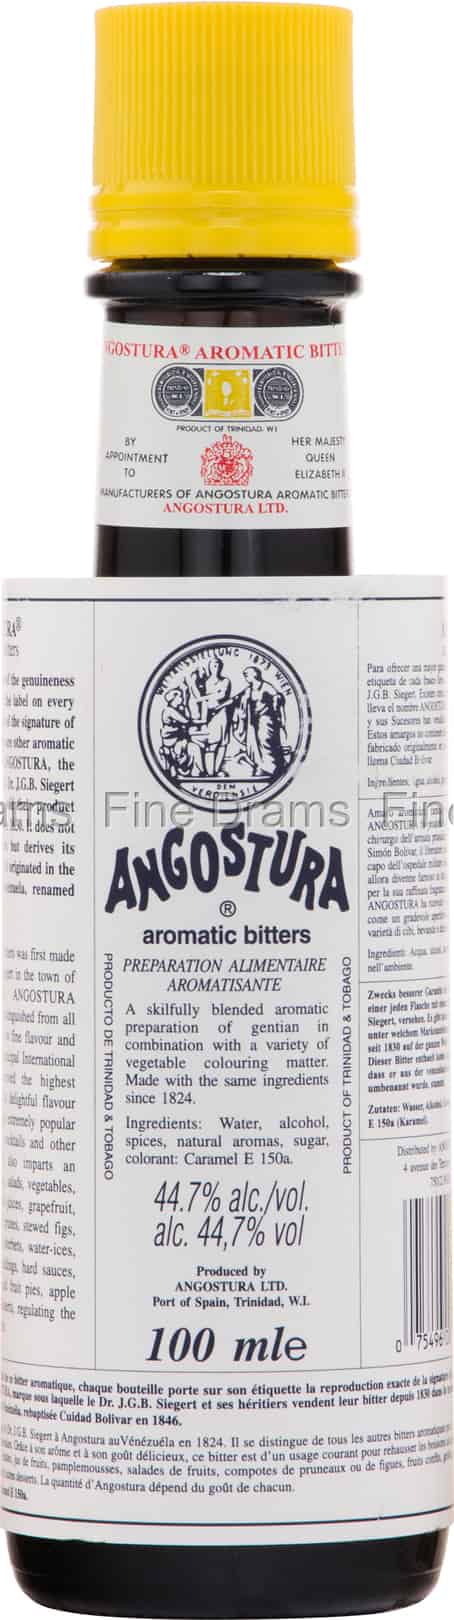 Angostura Aromatic Bitters cl) (10